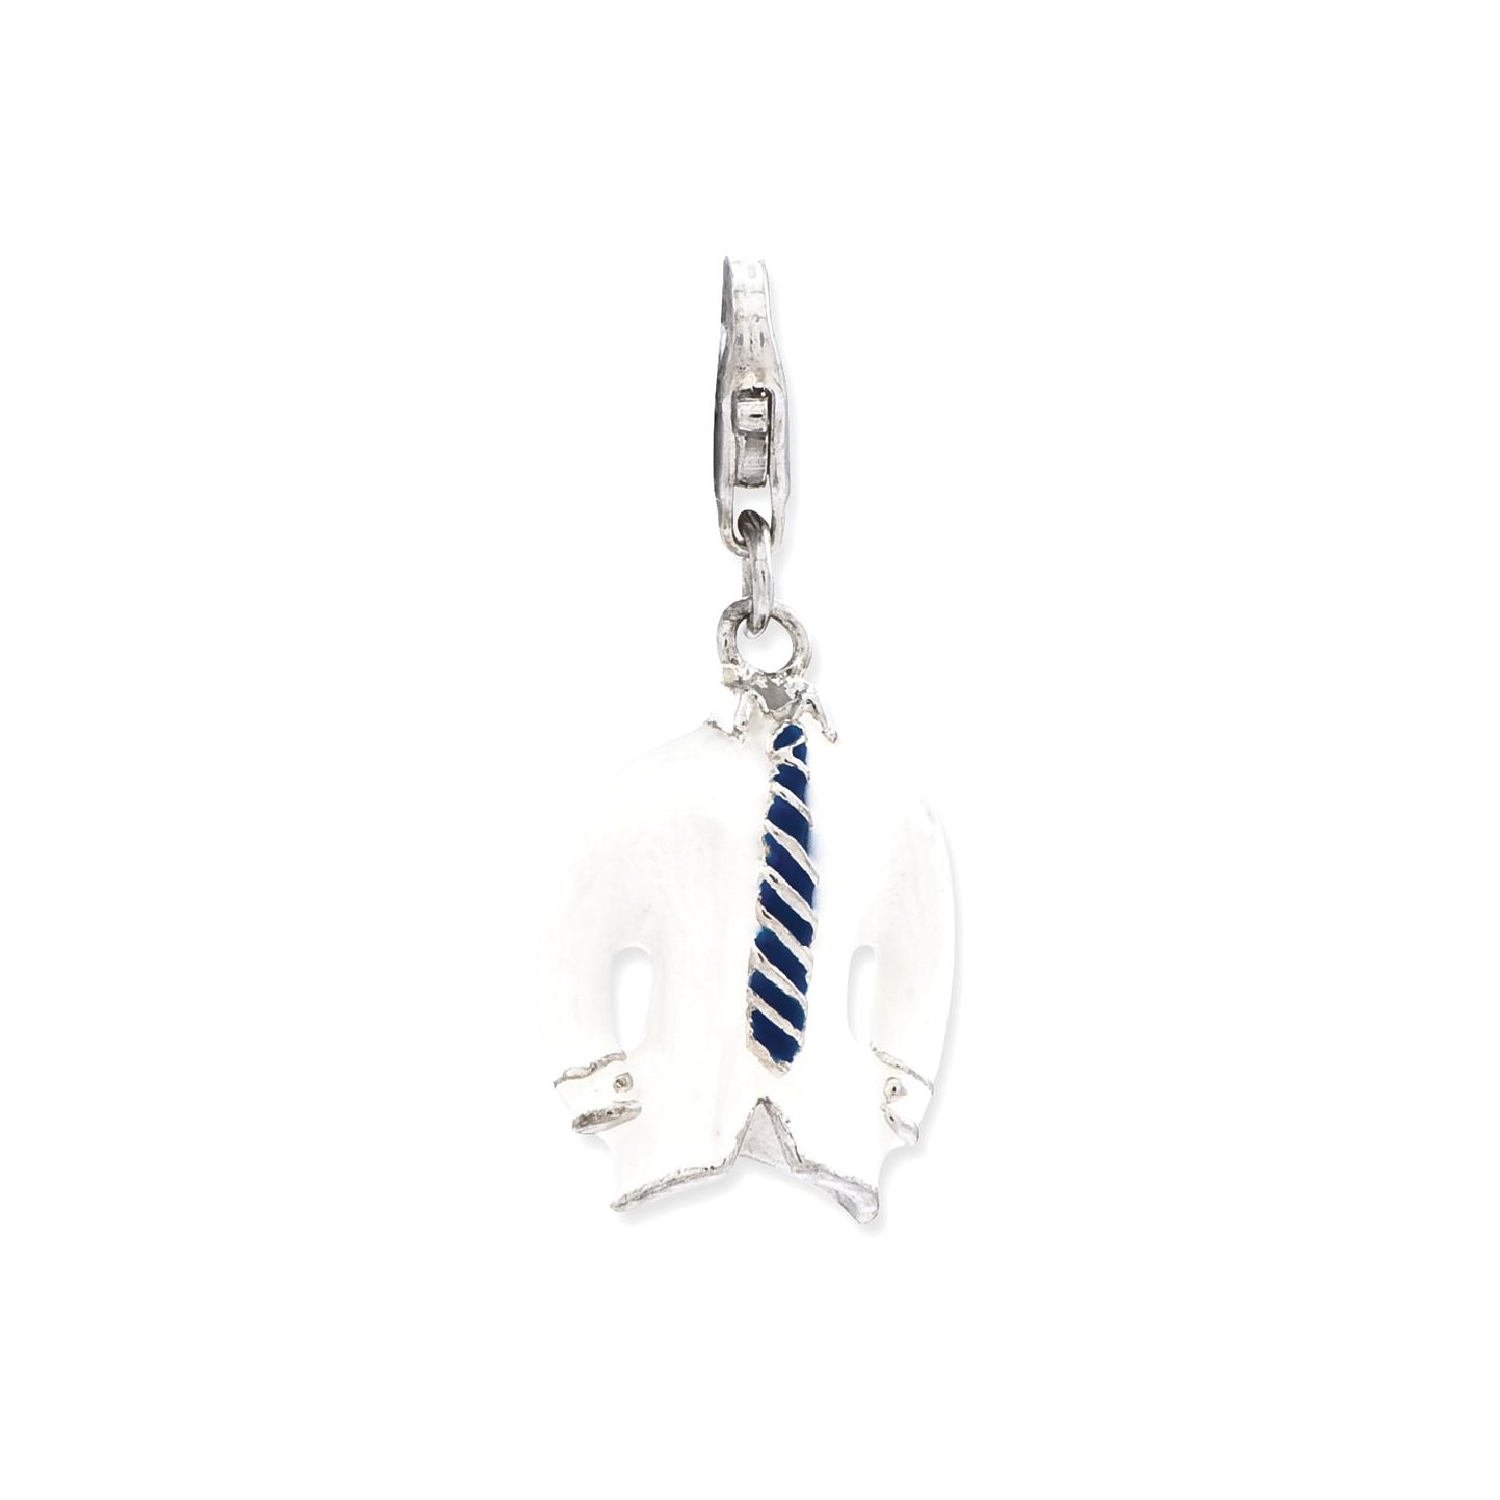 IceCarats 925 Sterling Silver 3 D Enameled Collared Shirt Tie Lobster Clasp Pendant Charm Necklace